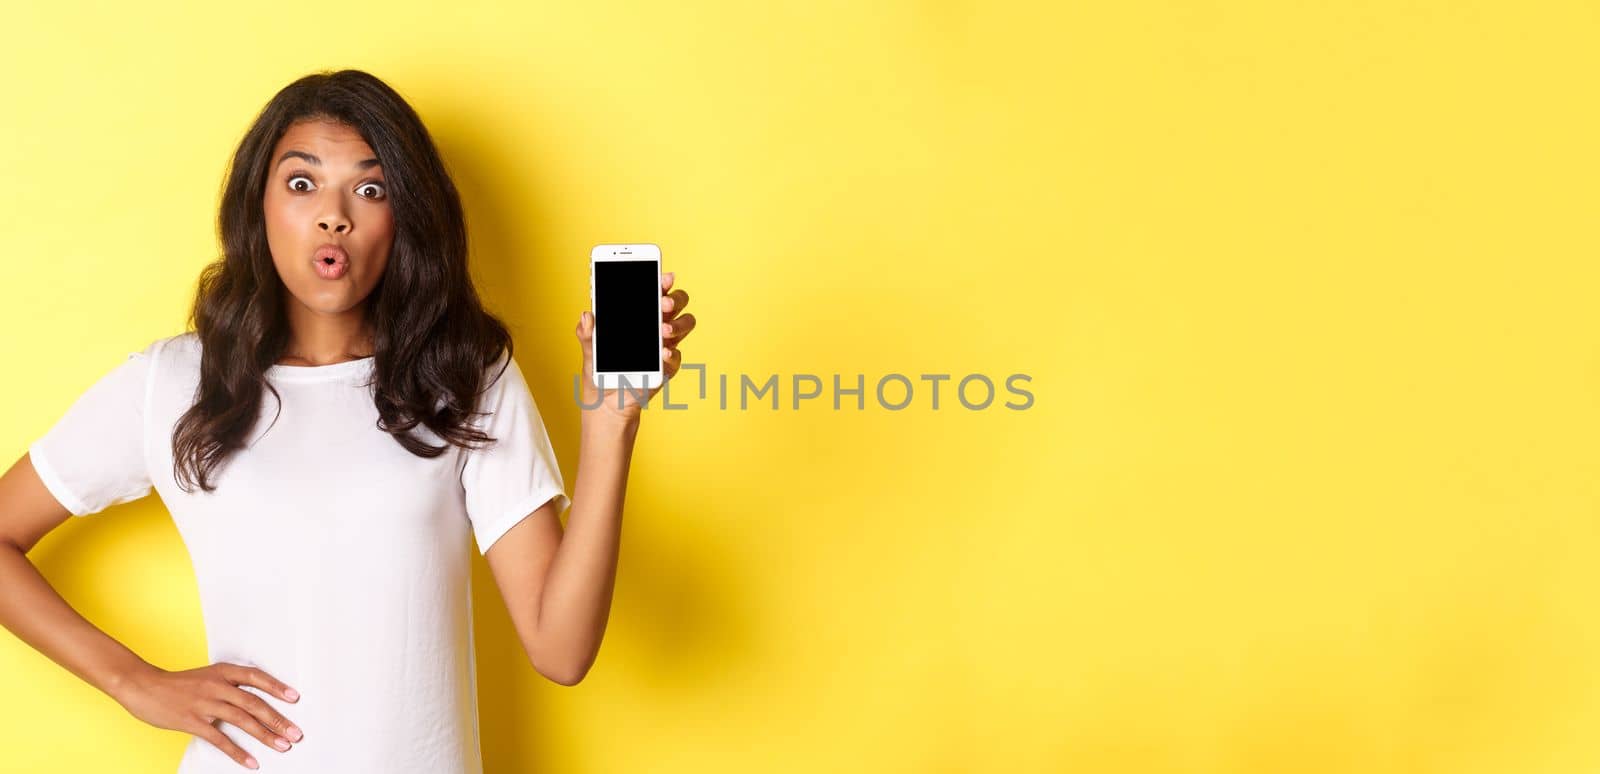 Image of amazed african-american girl, looking fascinated and showing smartphone screen, standing over yellow background.